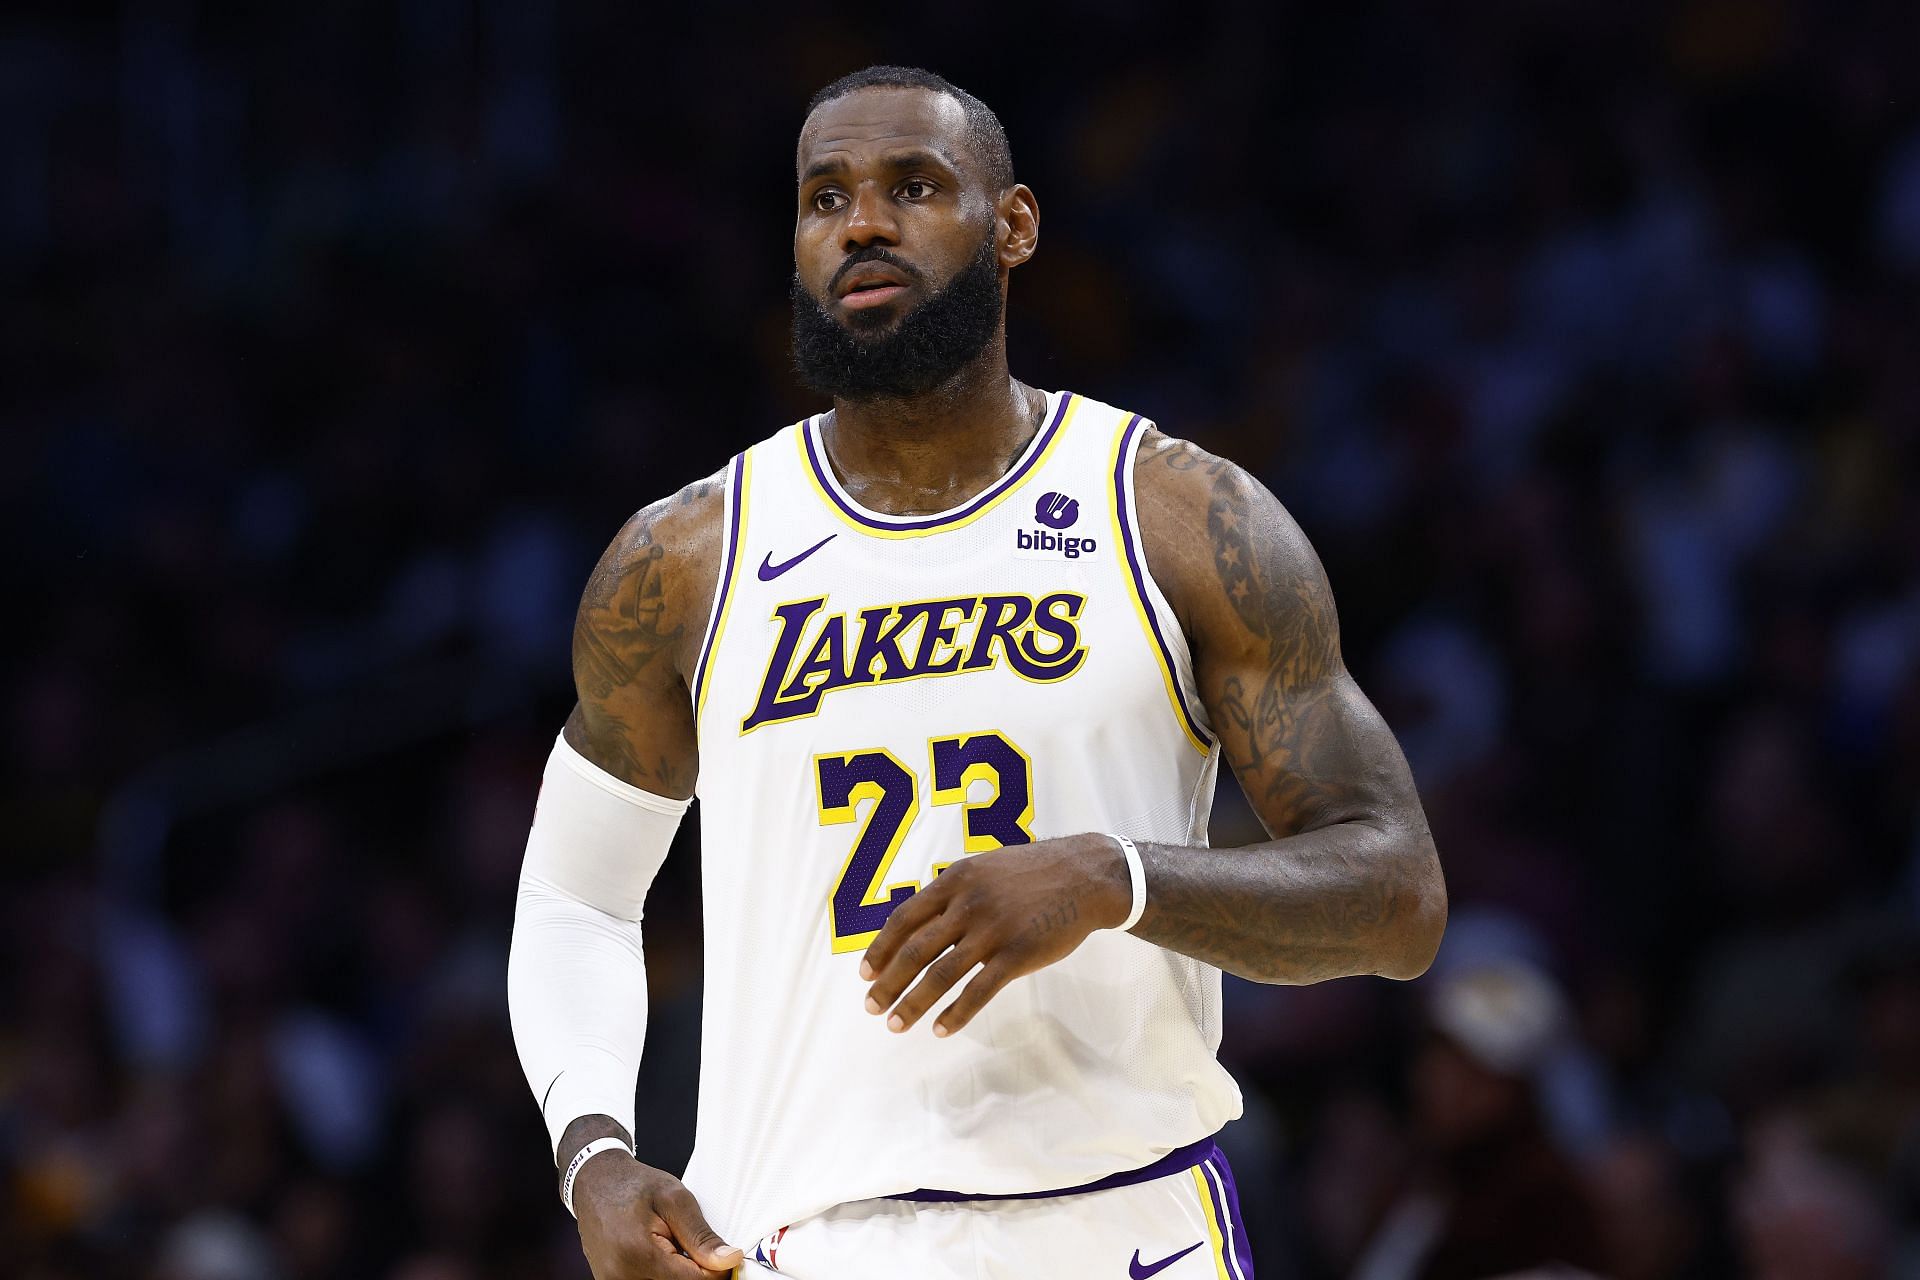 LeBron James will most likely return to play for the LA Lakers next season